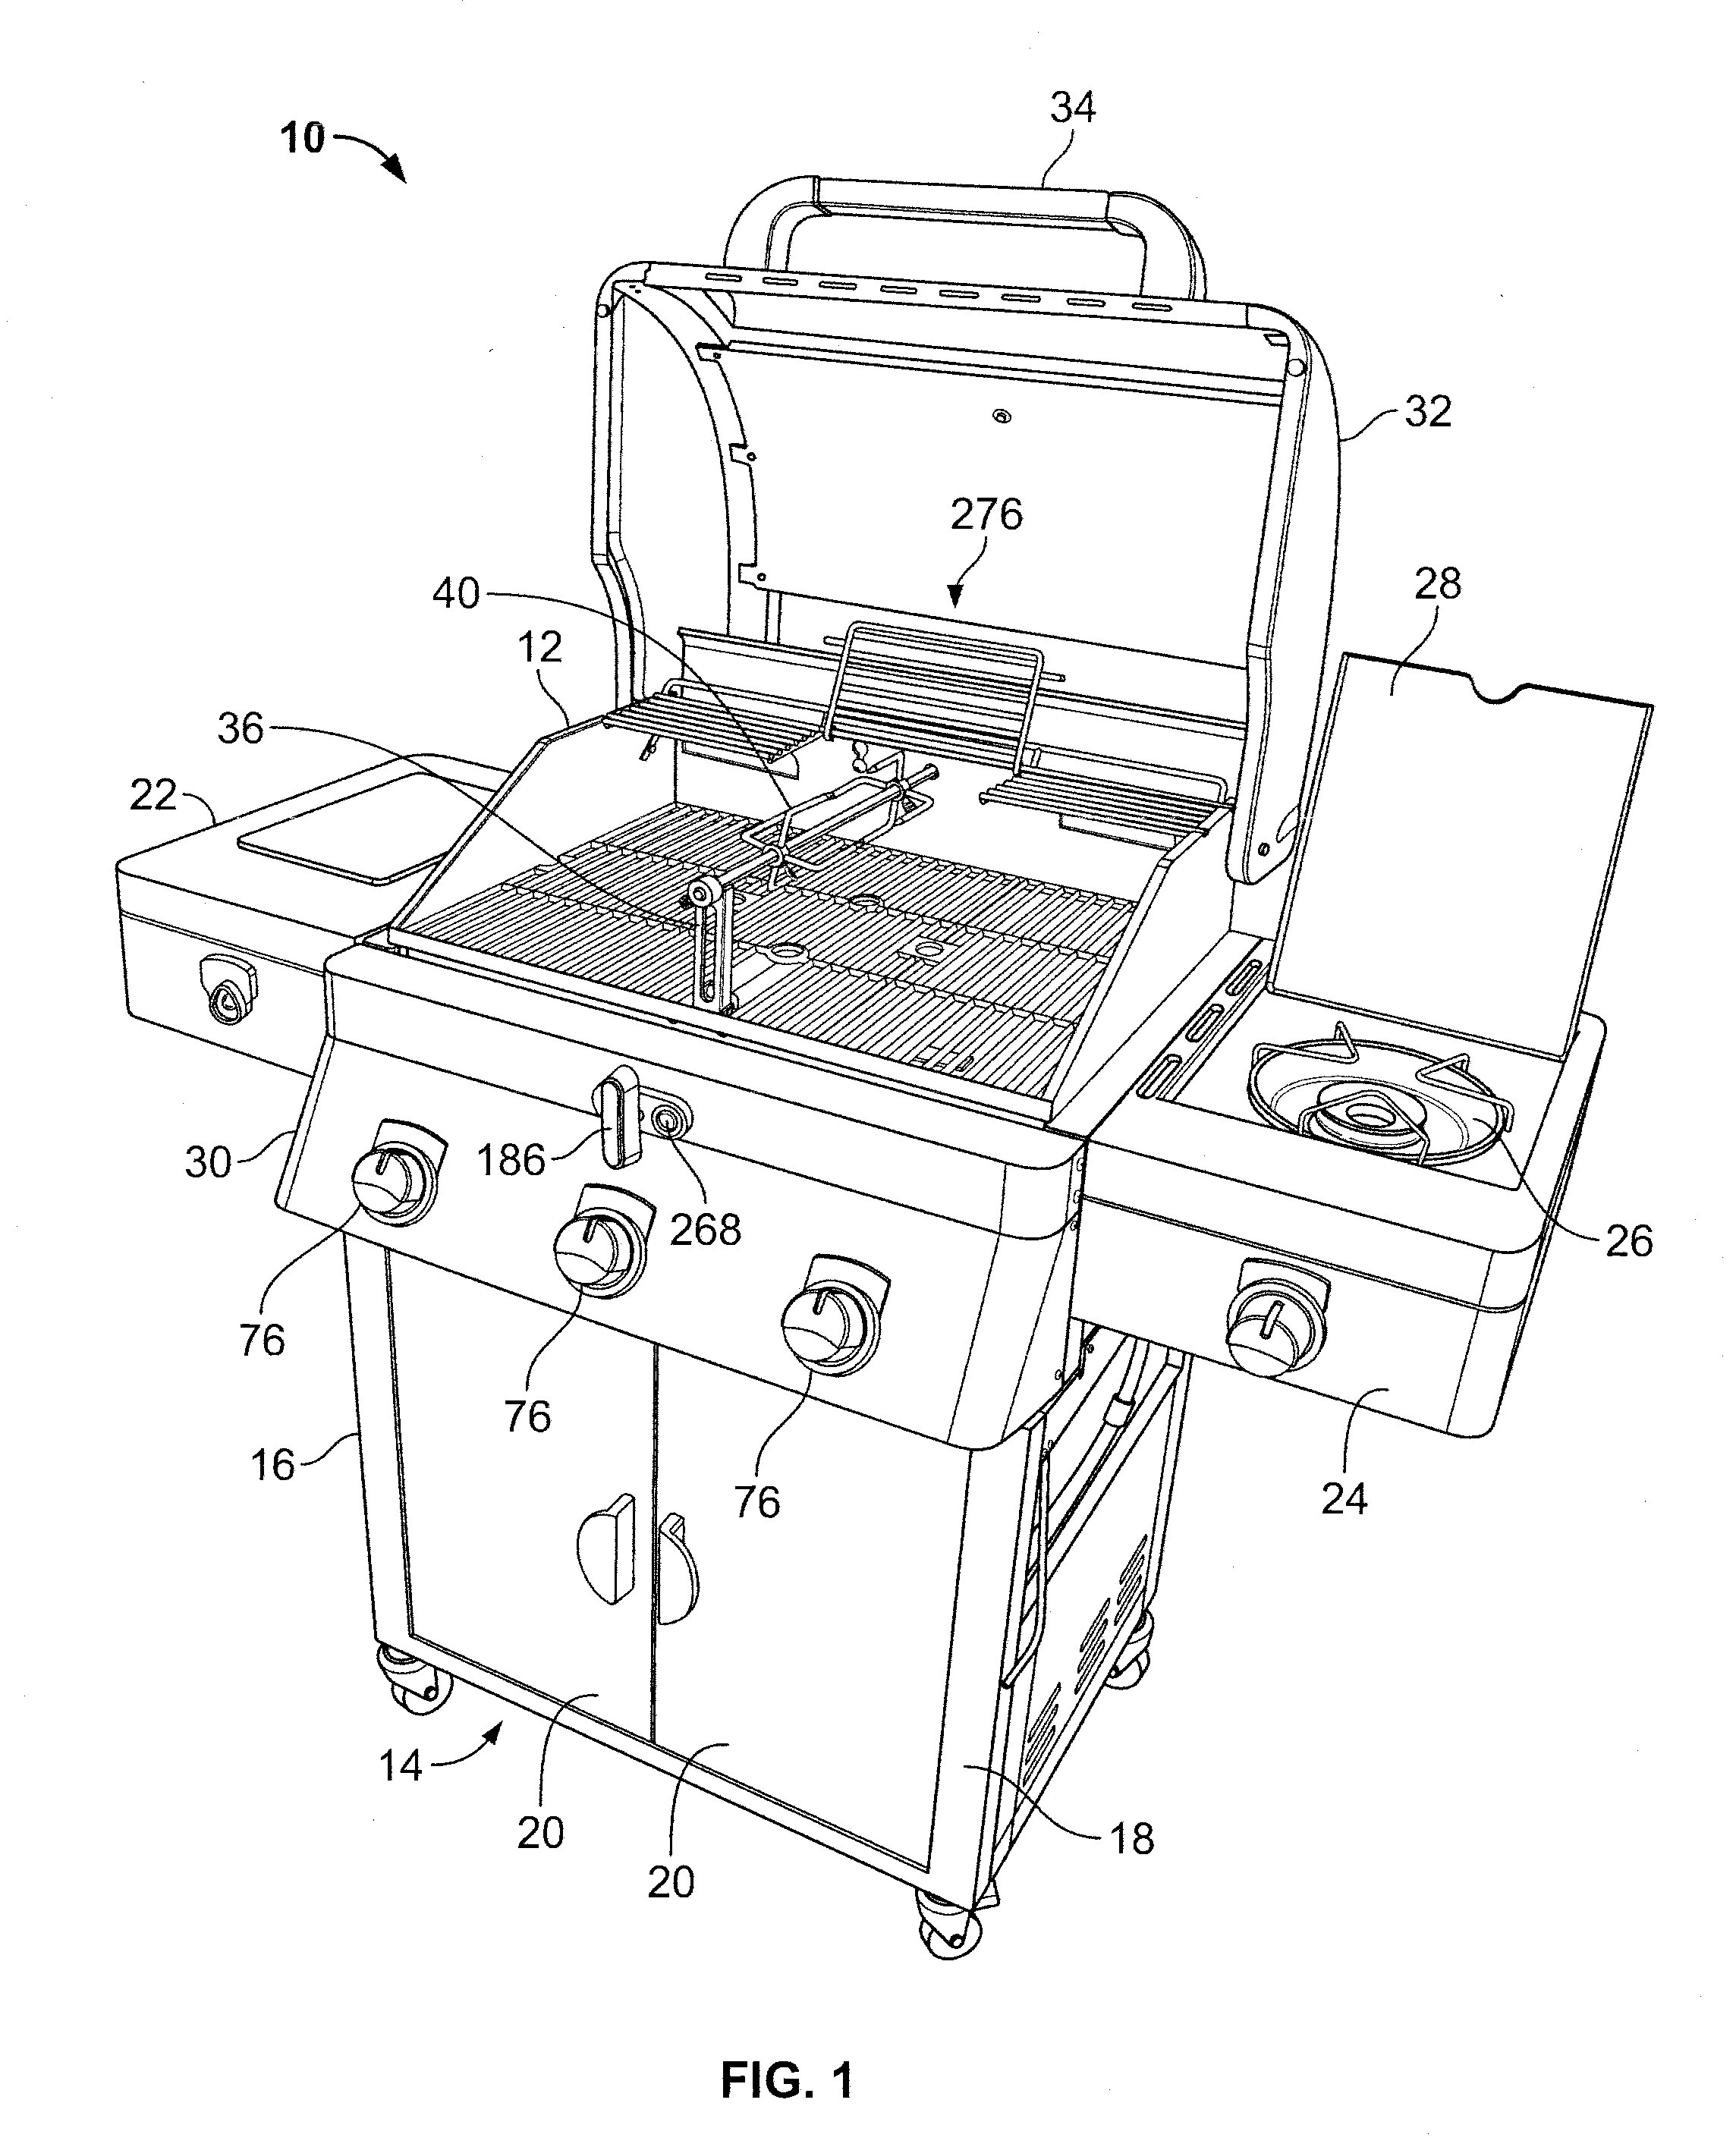 Partitioned grill and rotisserie